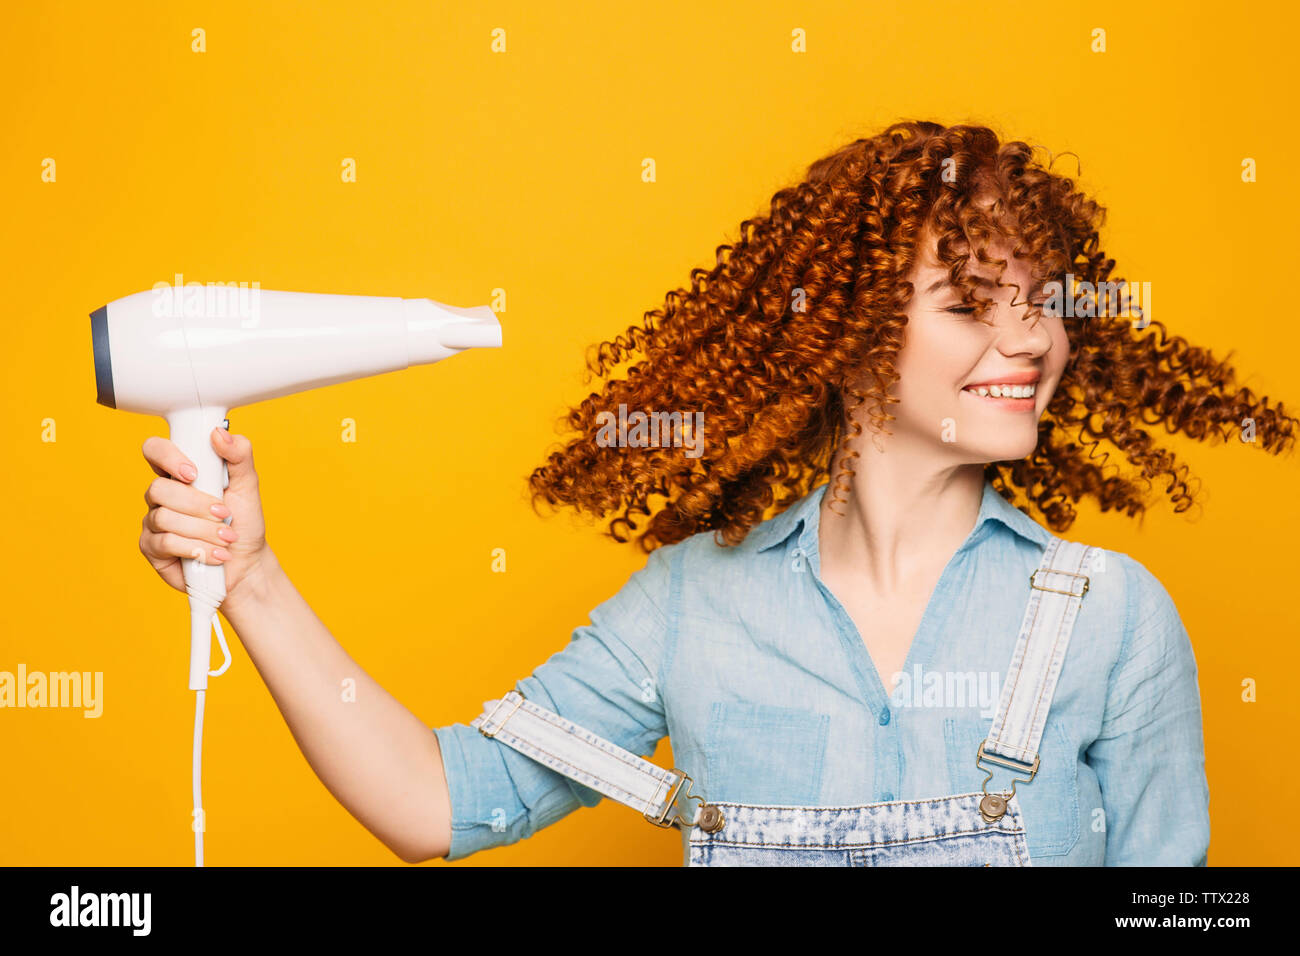 curly red-haired woman using hair dryer on yellow background. Making perfect curls Stock Photo